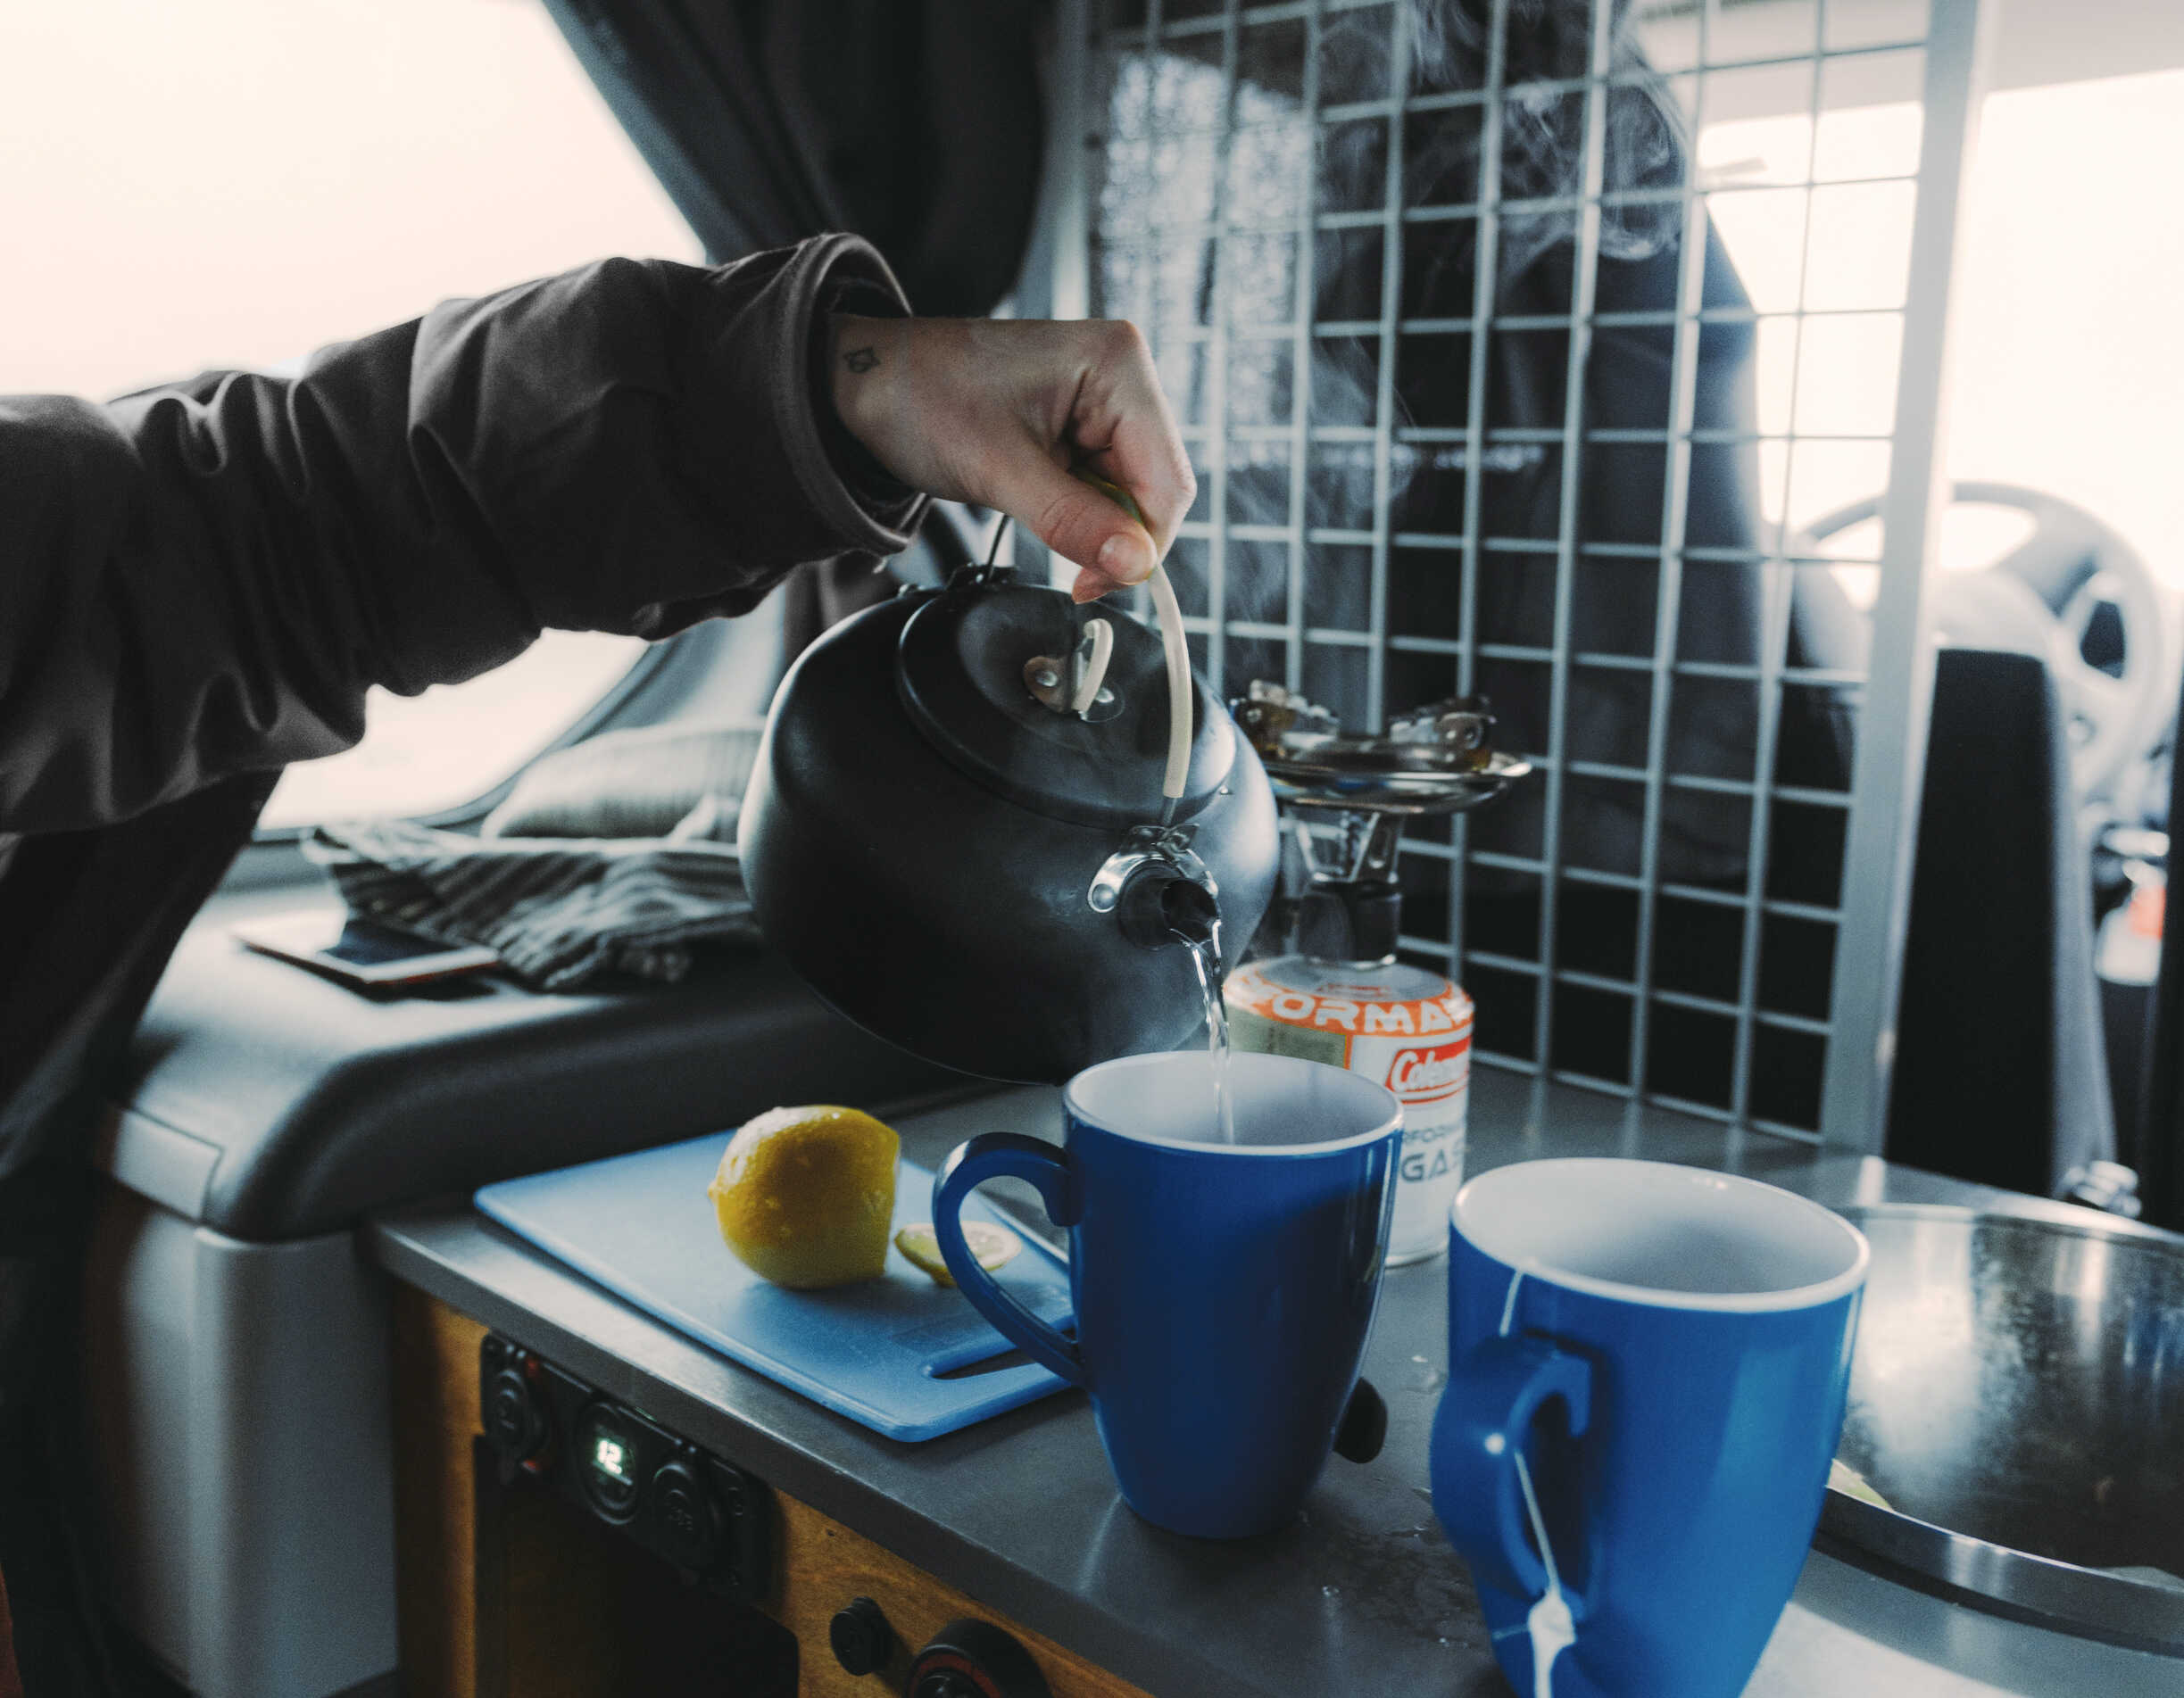 A person is making a tea inside the campervan